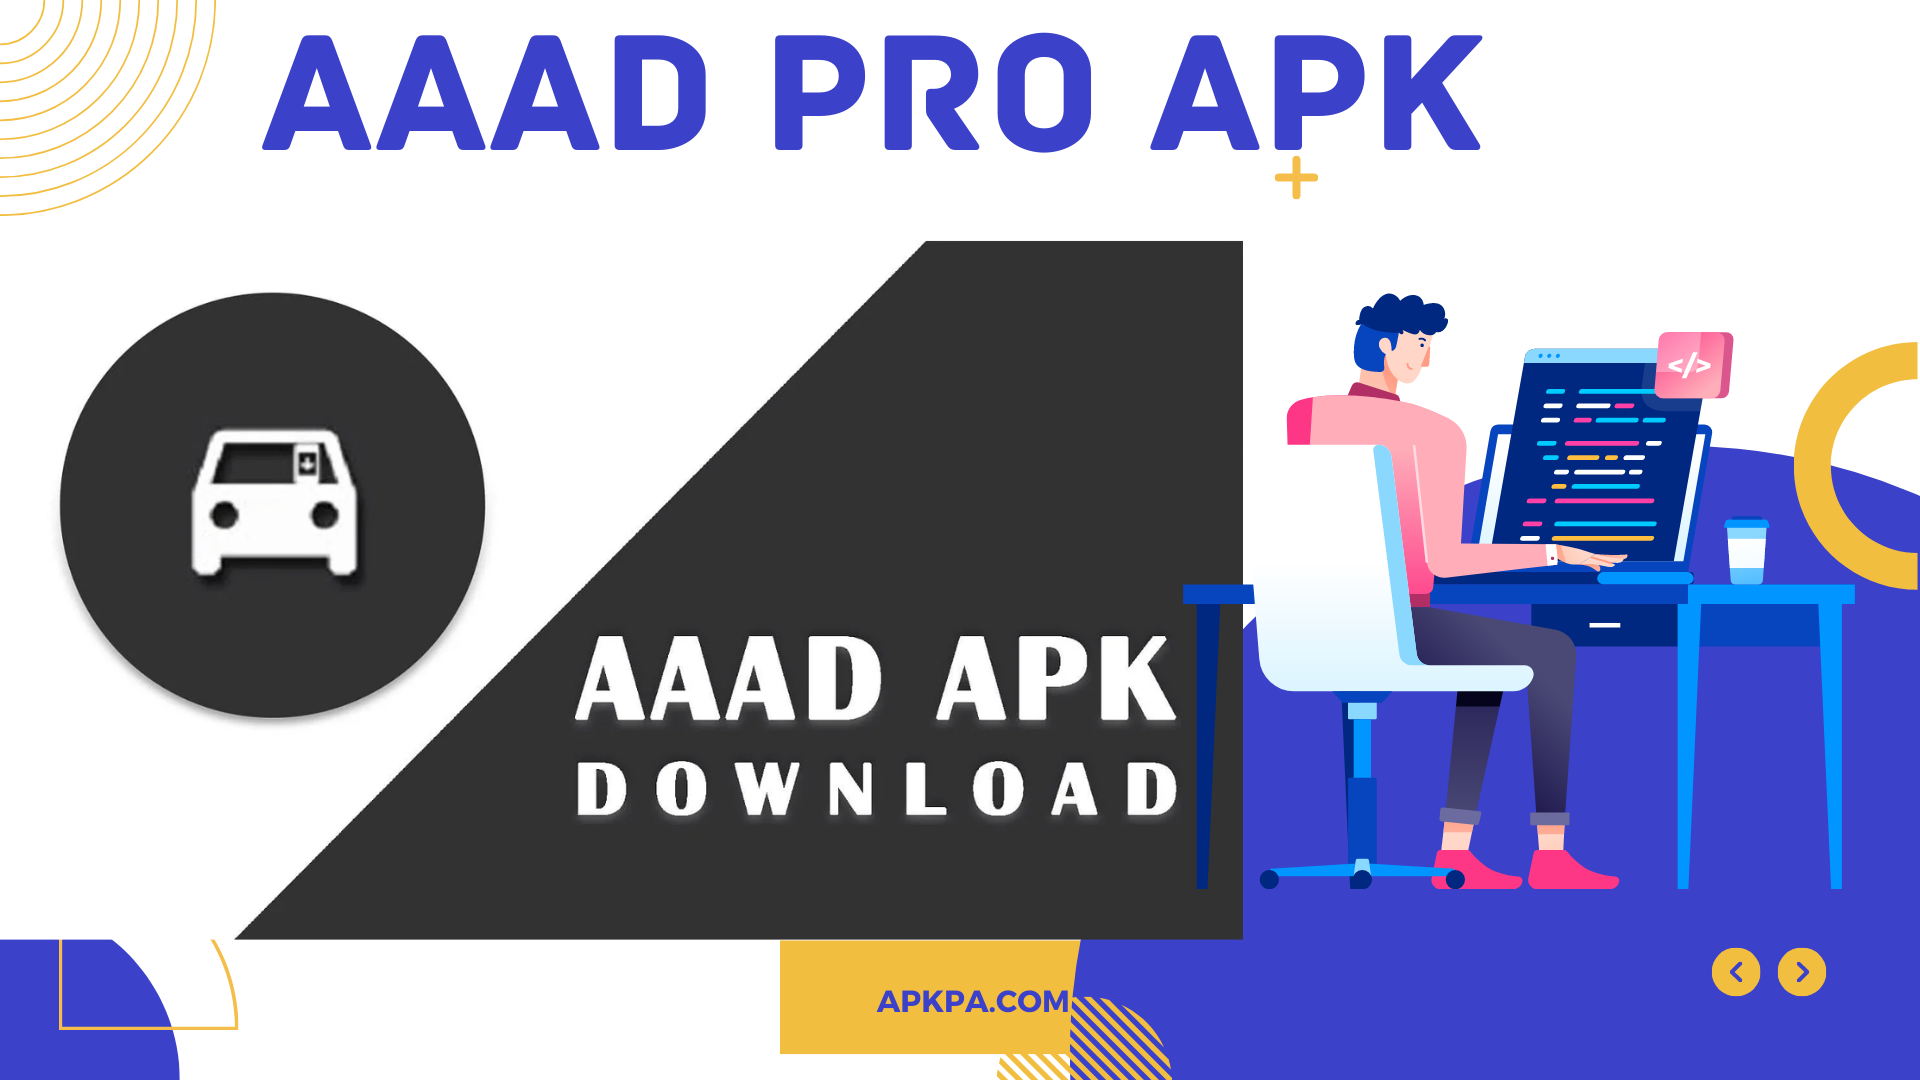 Download AAAD Pro APK mod 1.4.4 Play videos in car while driving apkpa